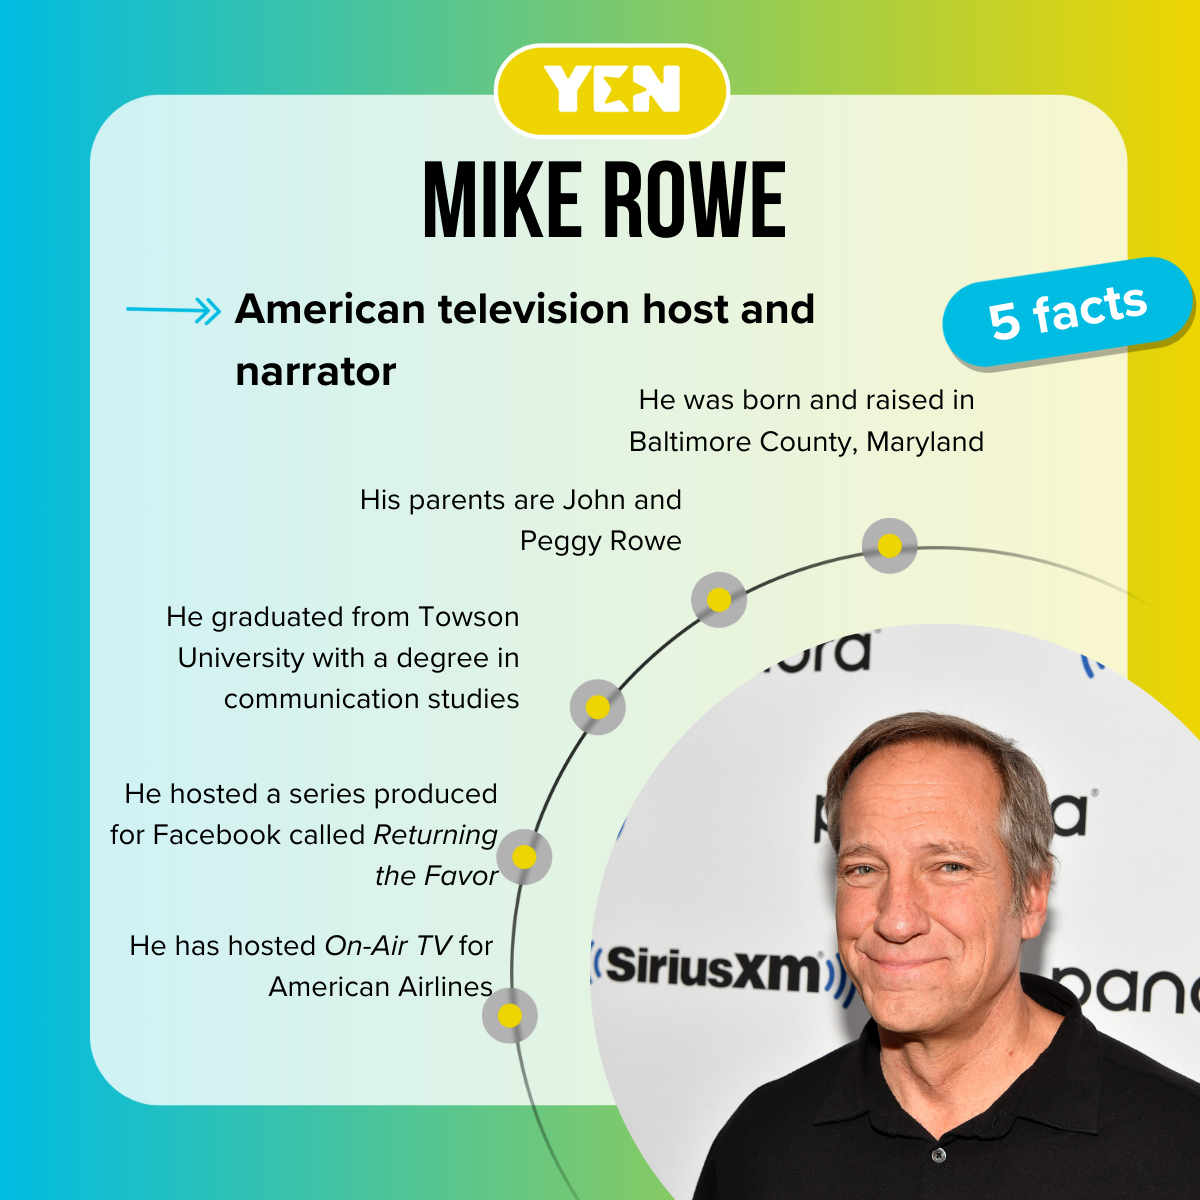 Top 5 facts about Mike Rowe